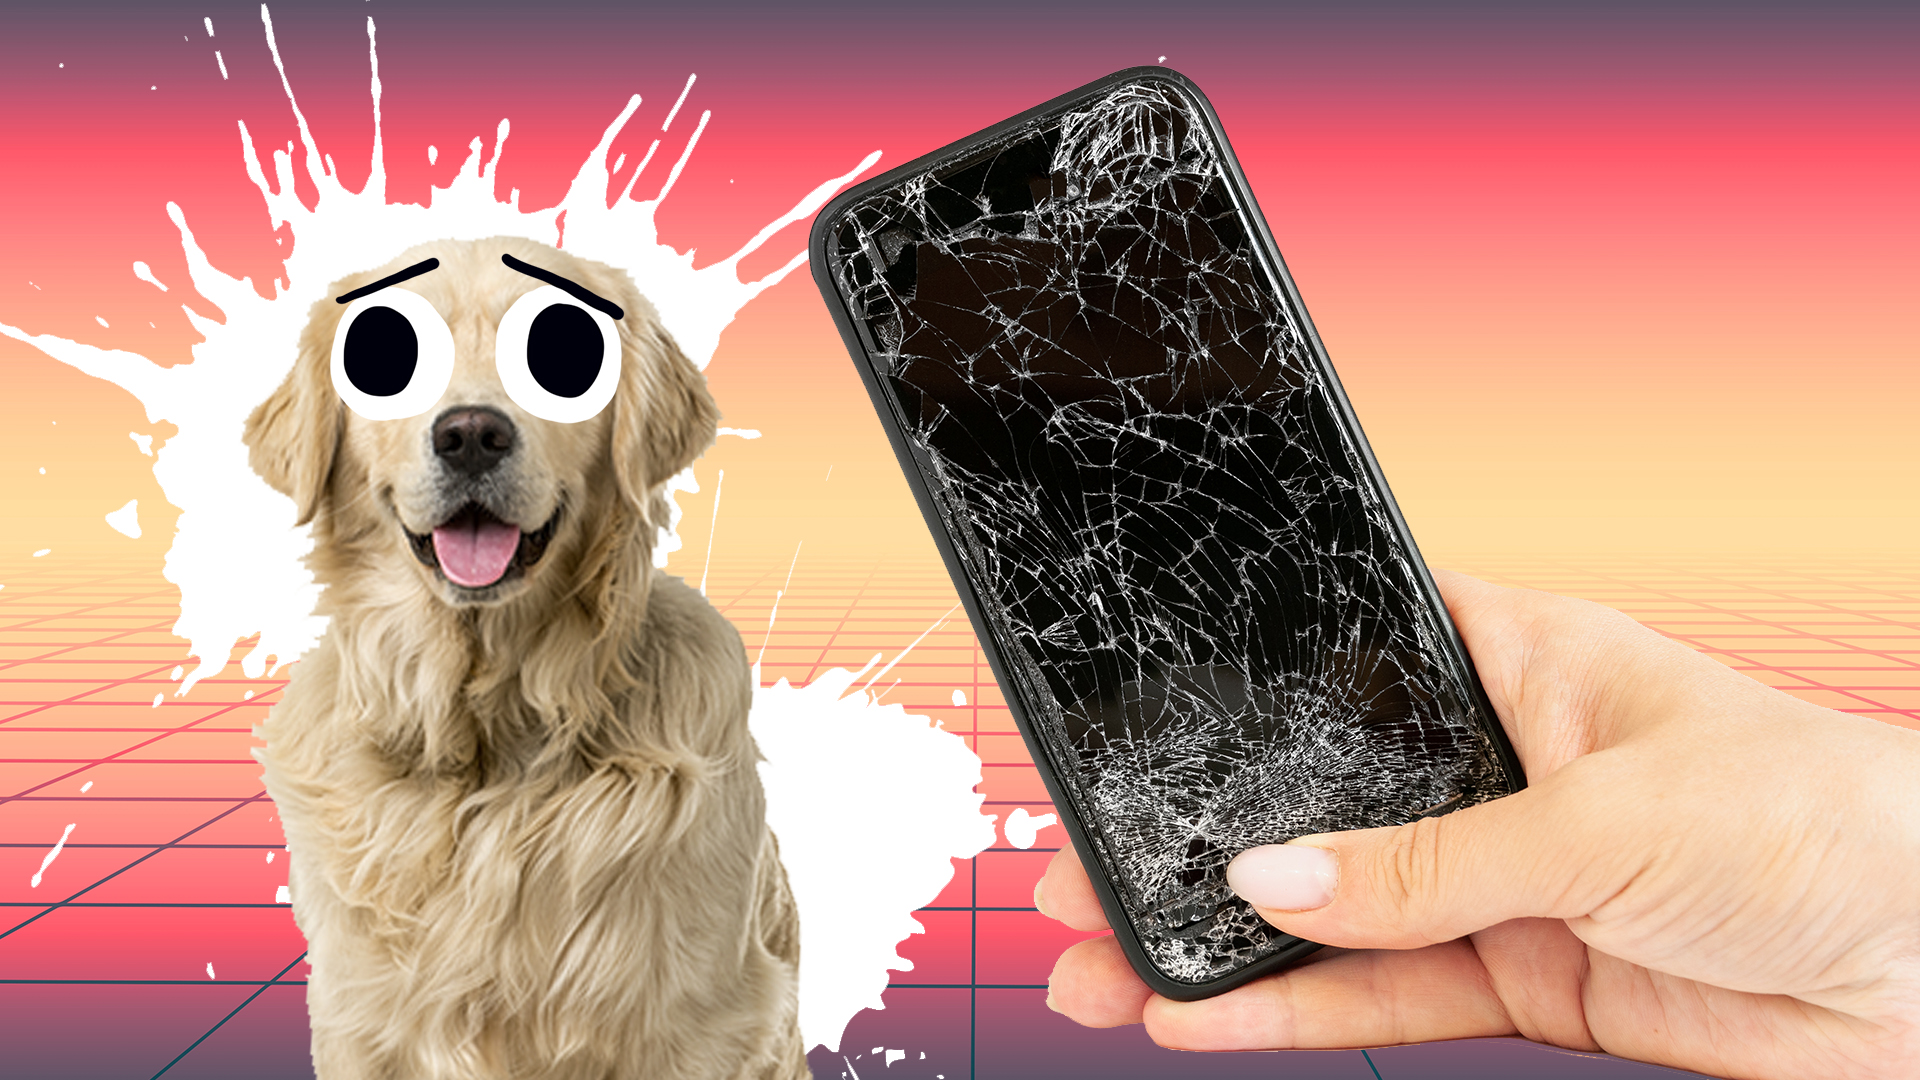 A dog looks sadly at a broken smartphone